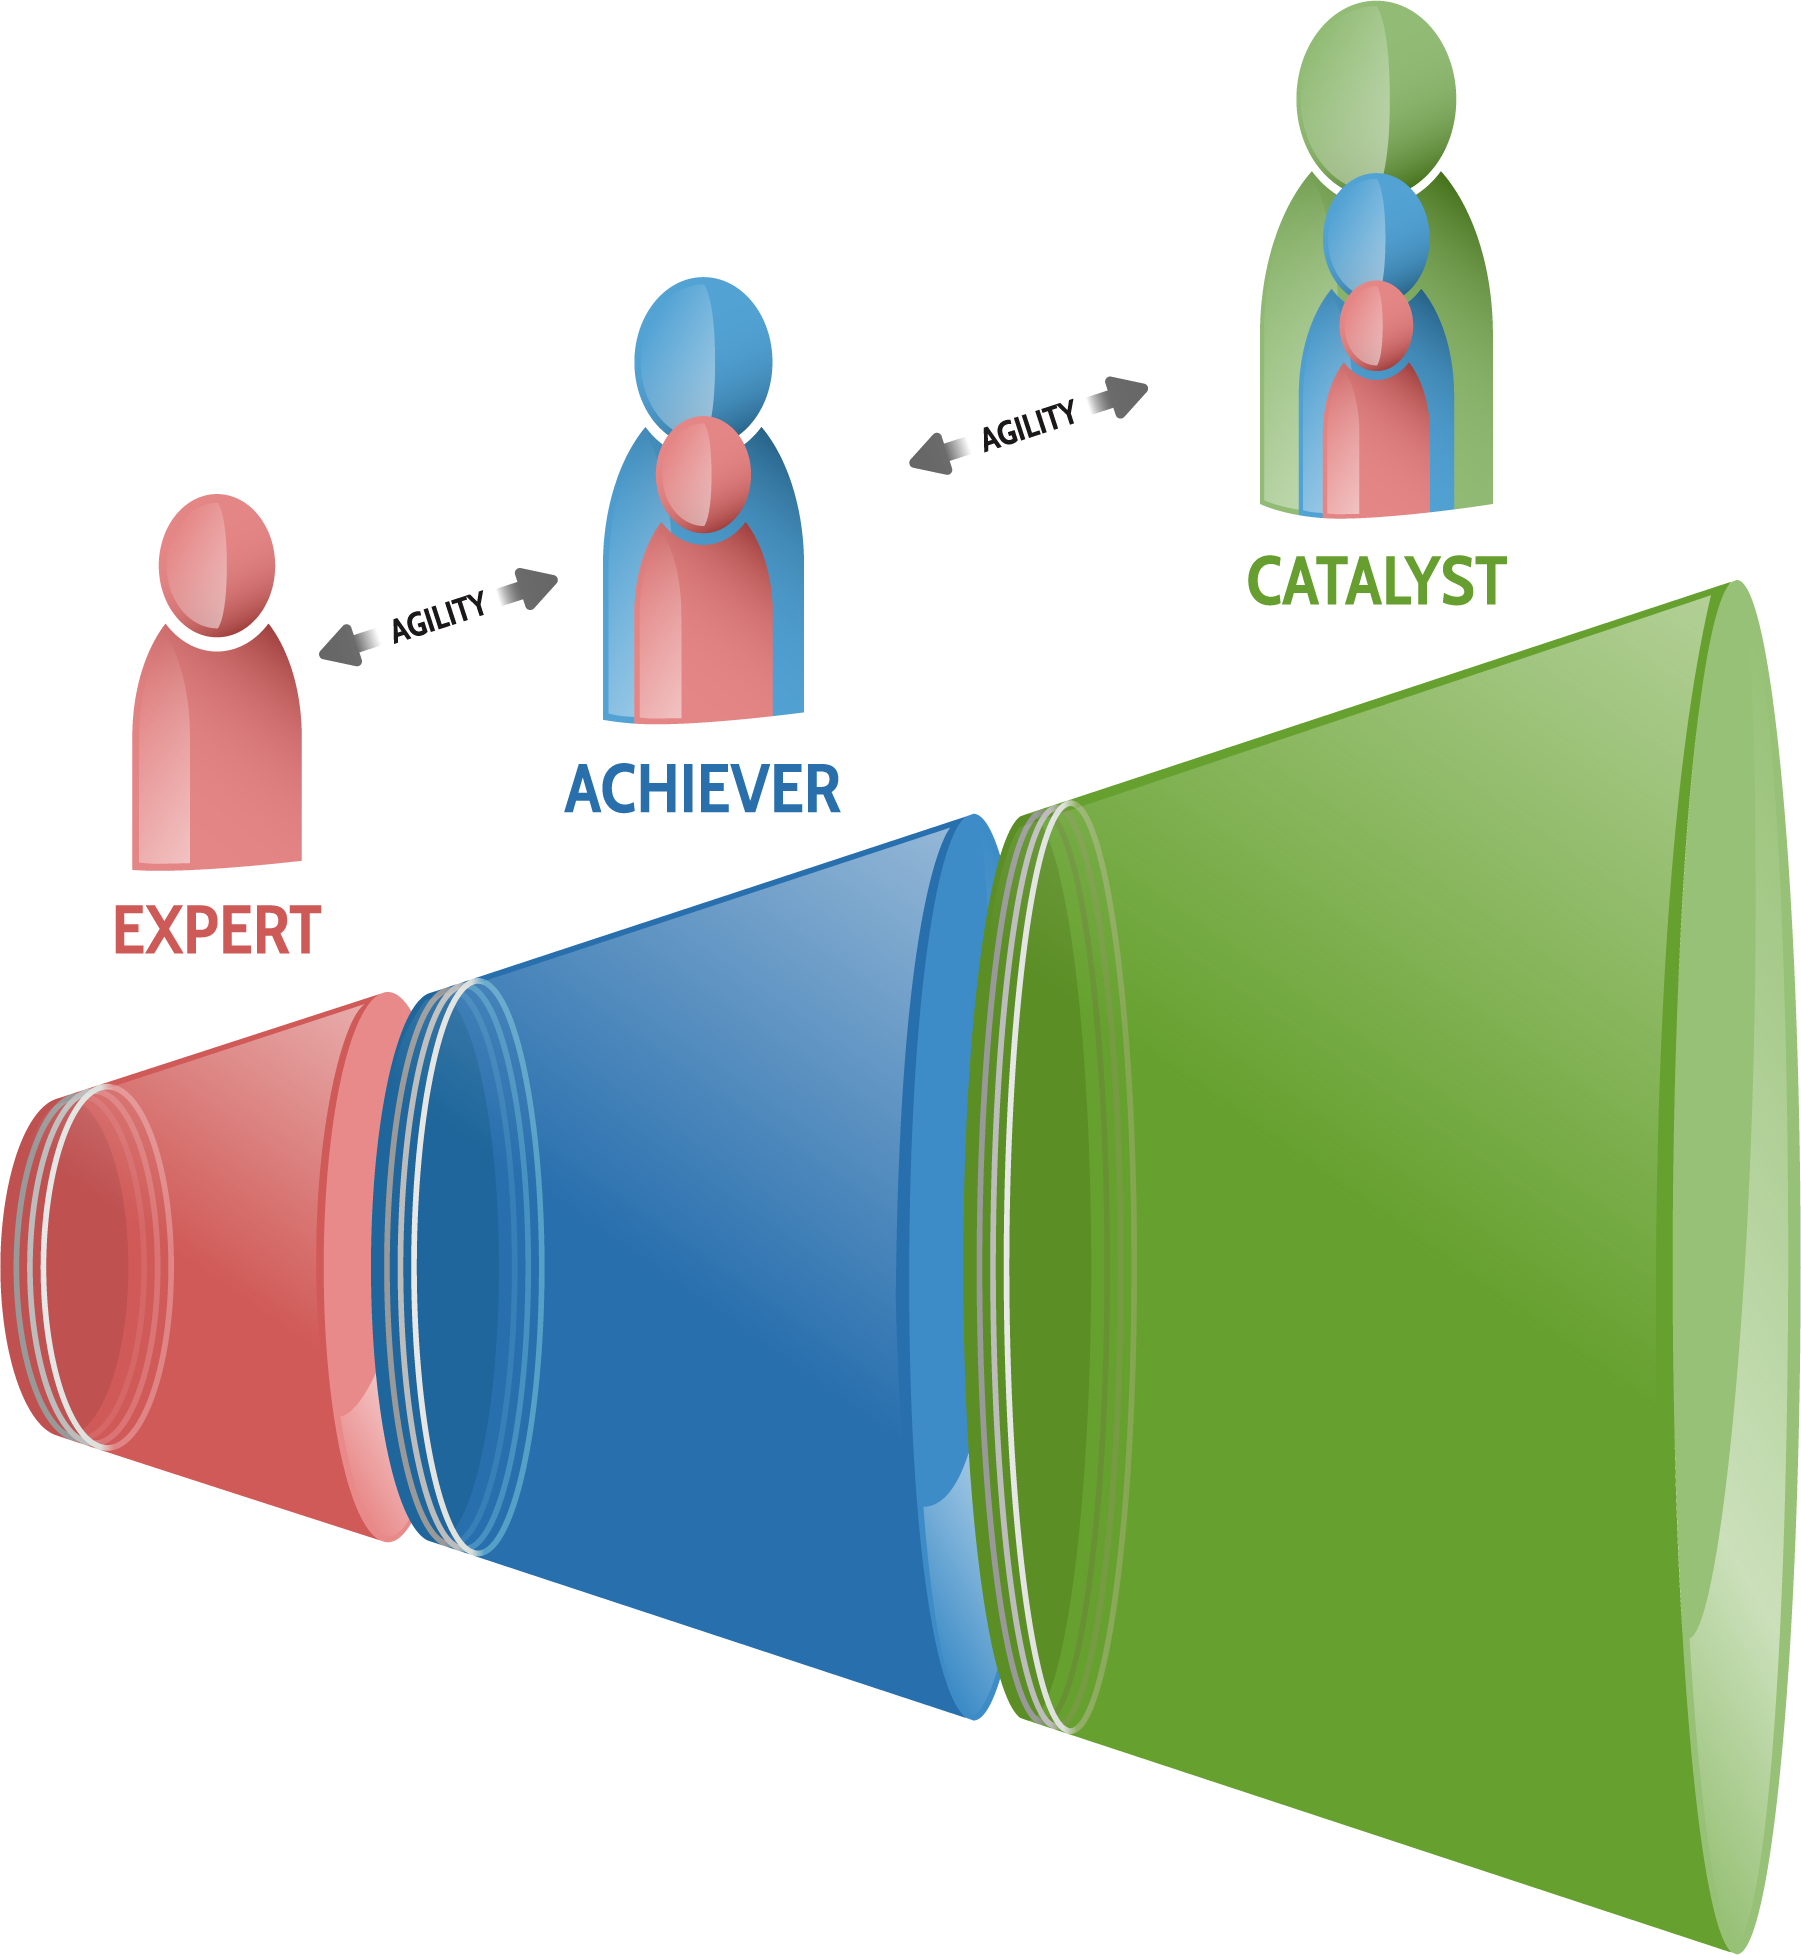 the leadership agility cone with the words expert, achiever, and catalyst underneath each leader figure